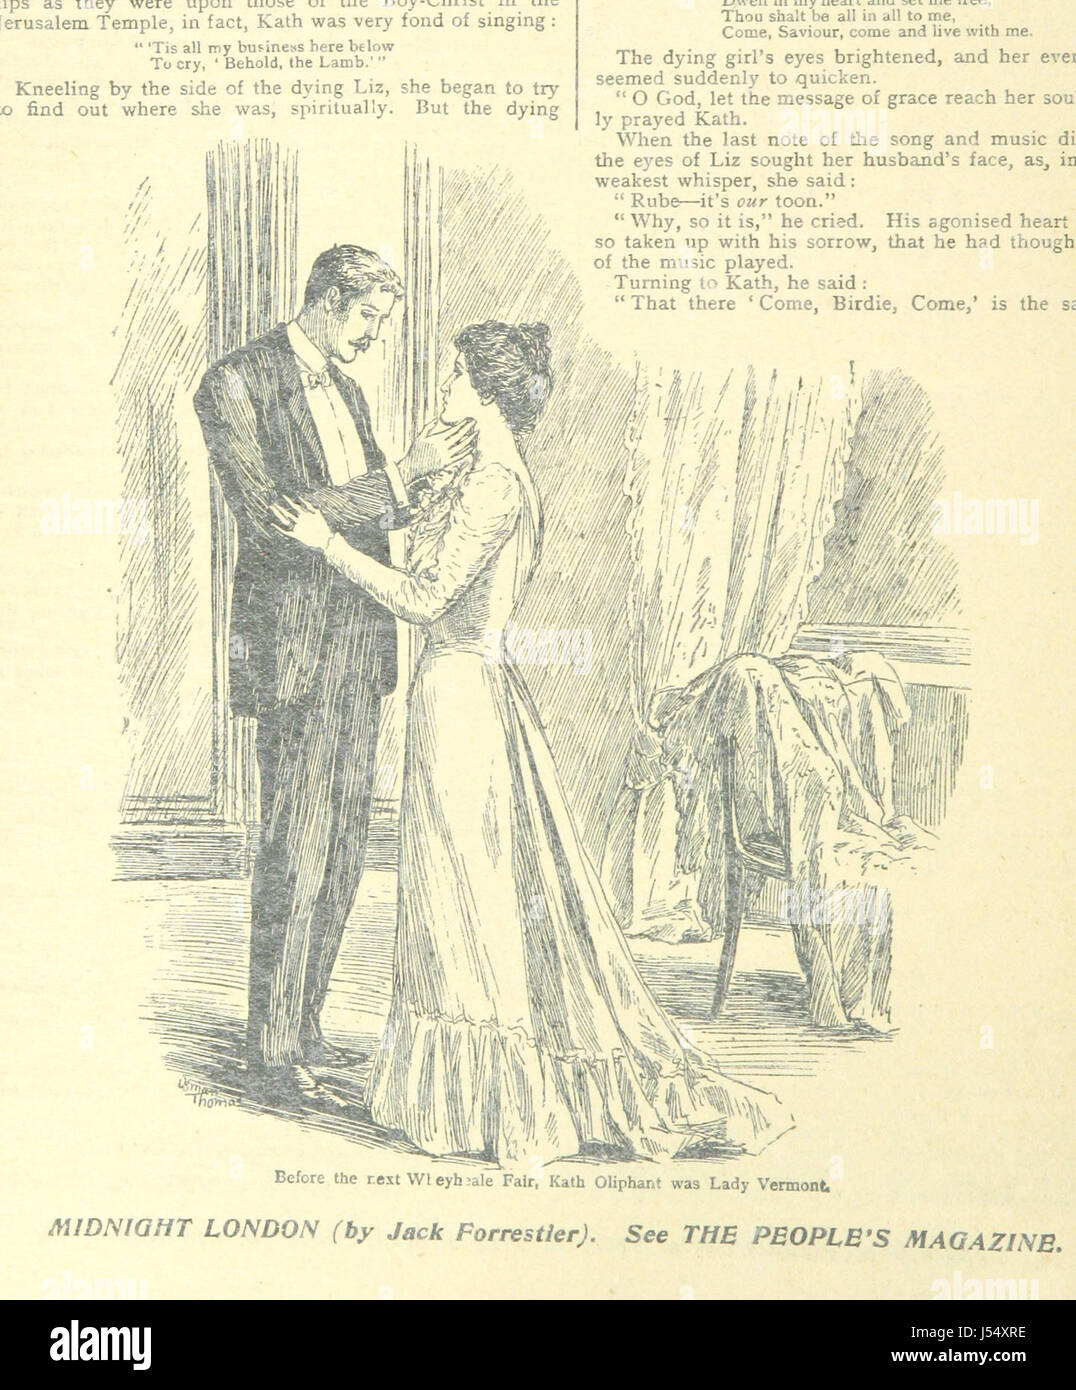 Image taken from page 62 of 'Thrilling Life Stories for the Masses' Stock Photo